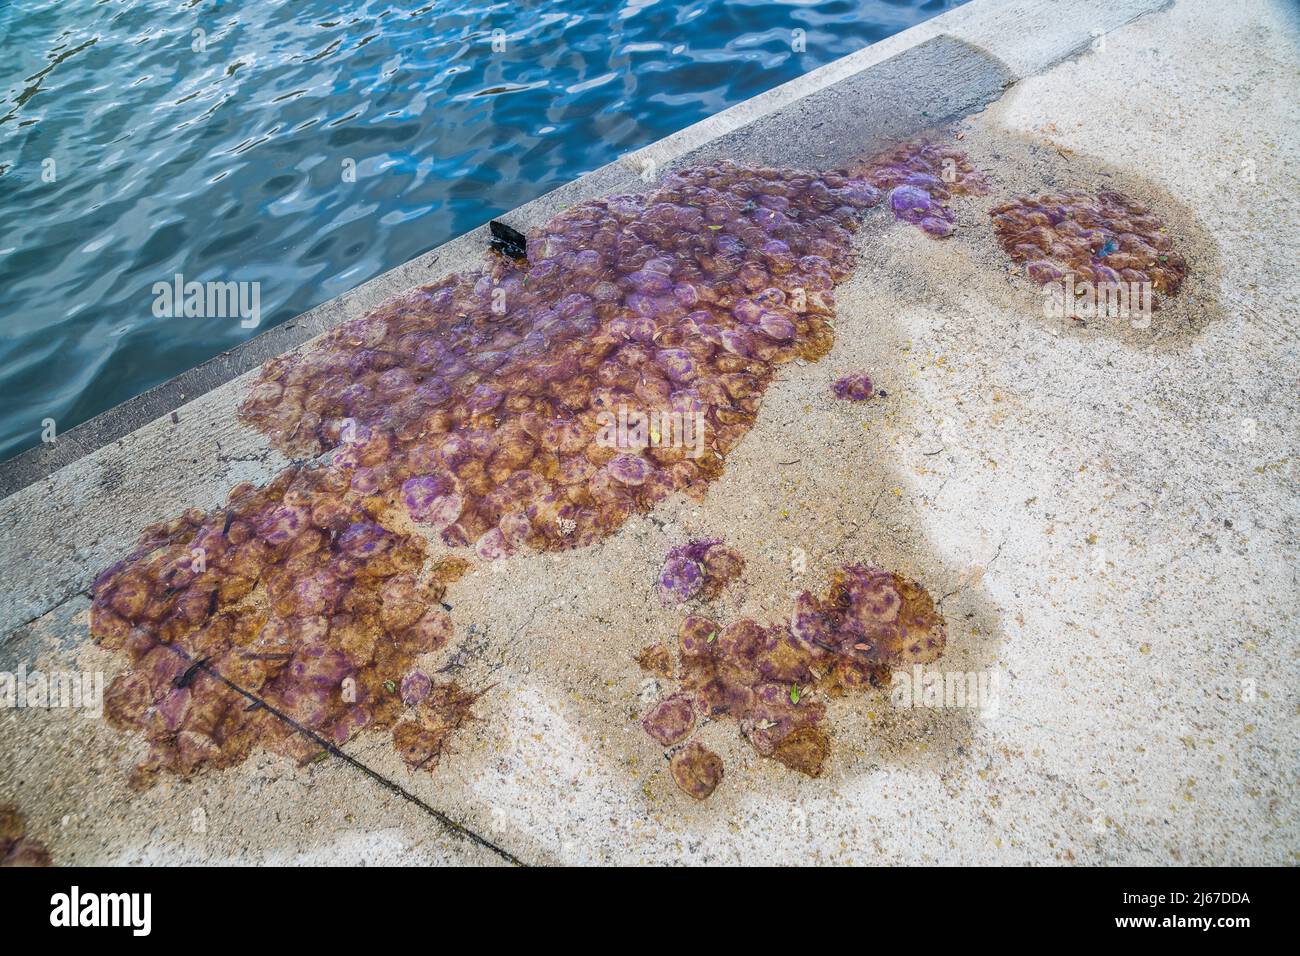 Mauve stinger (Pelagia noctiluca) is a jellyfish in the family Pelagiidae, washed up en masse on a wharf. Stock Photo